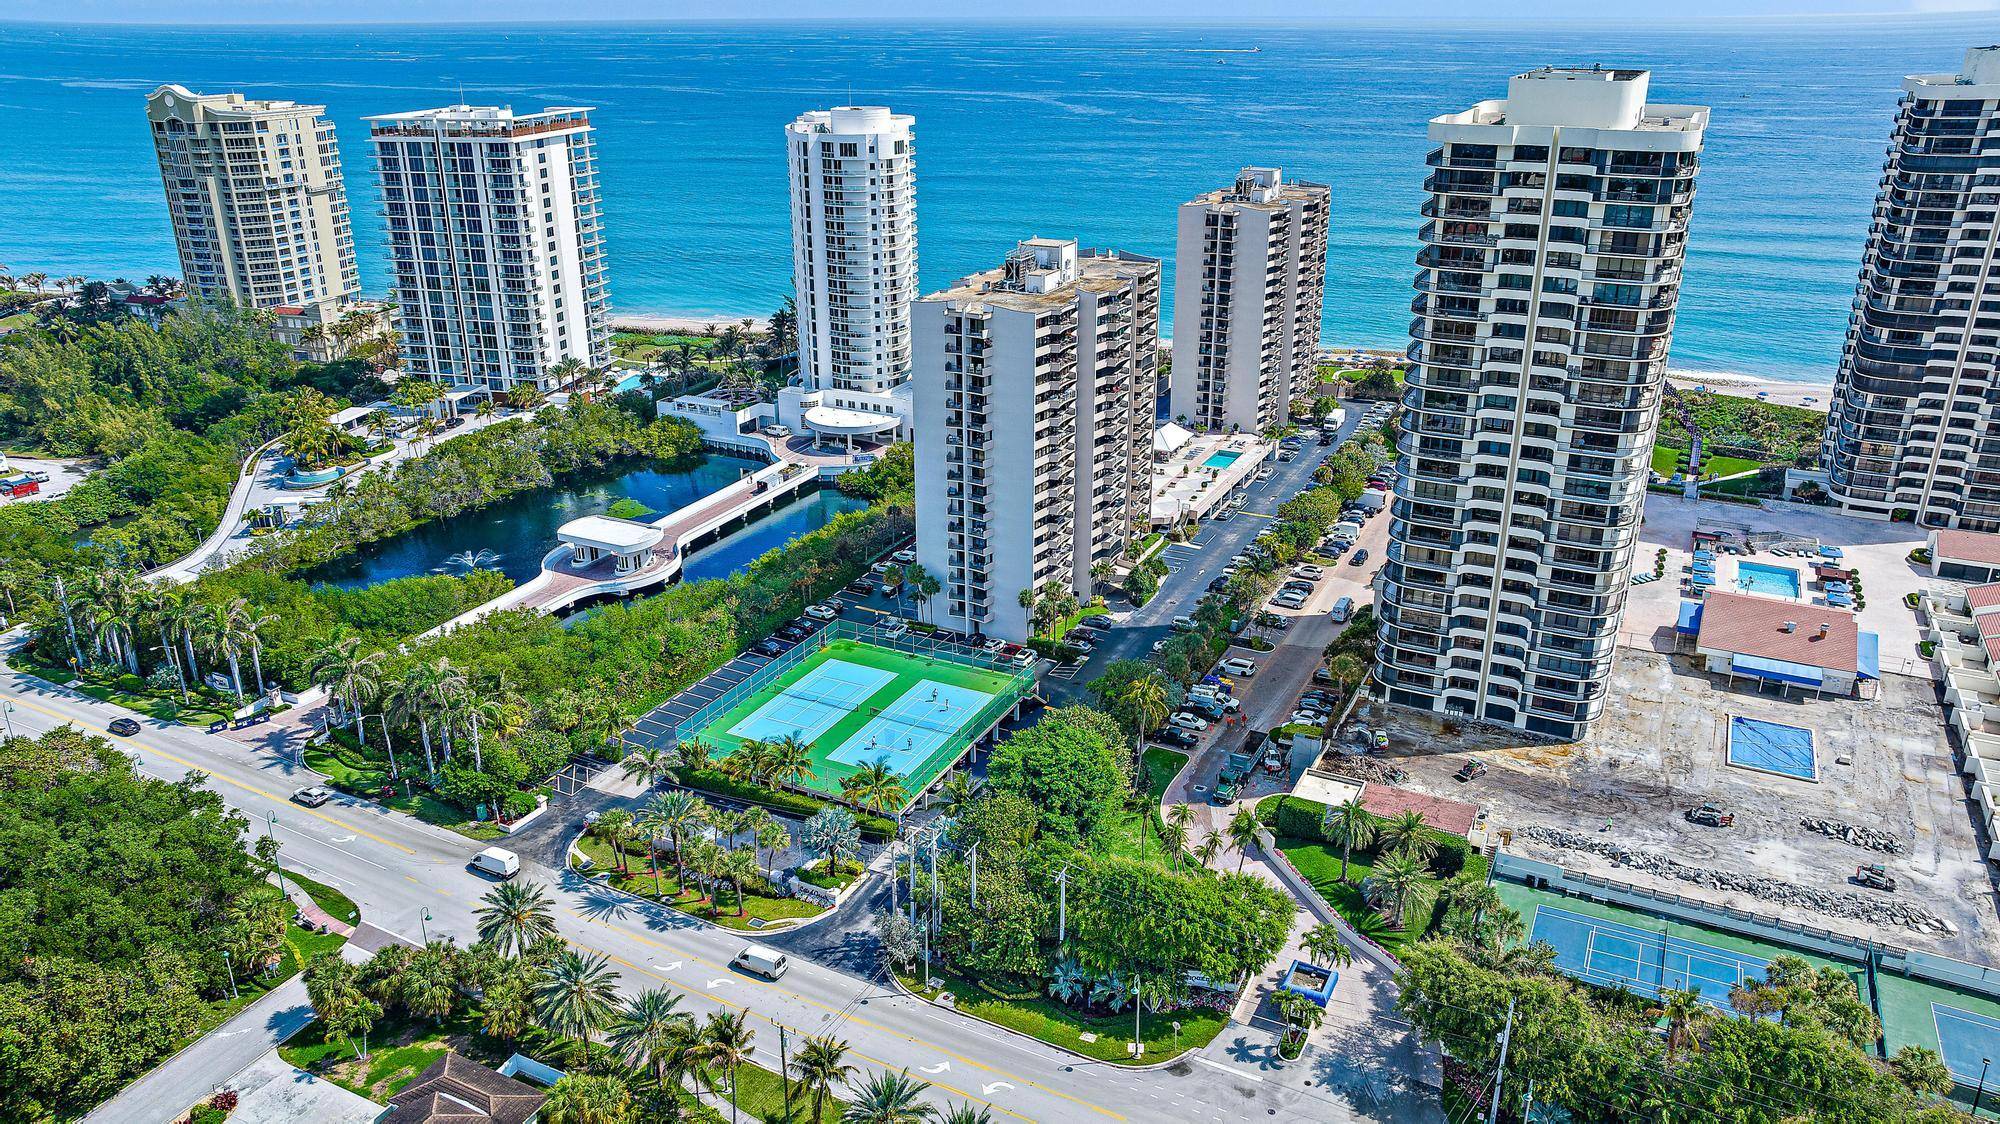 Located on Singer Island this 2 bedroom, 2 bathroom corner unit has two balconies, one to watch the sunrise over the Atlantic Ocean, and one to watch the sunset over ...